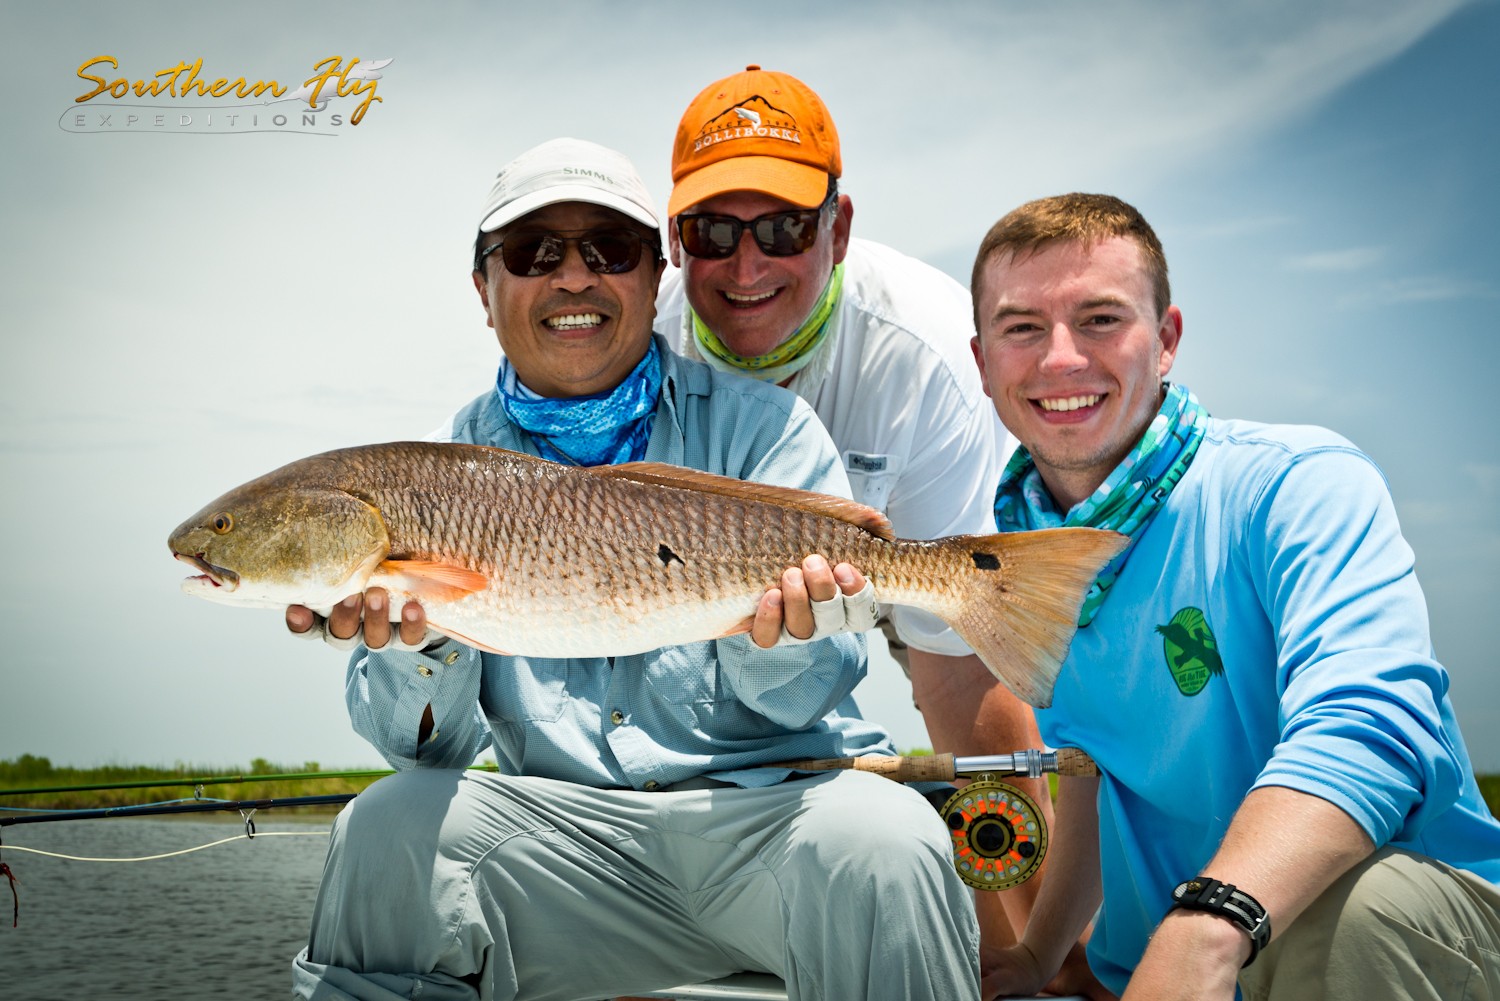 Fly Fishing Photos of Redfish with Captain Brandon Keck of Southern Fly Expeditions